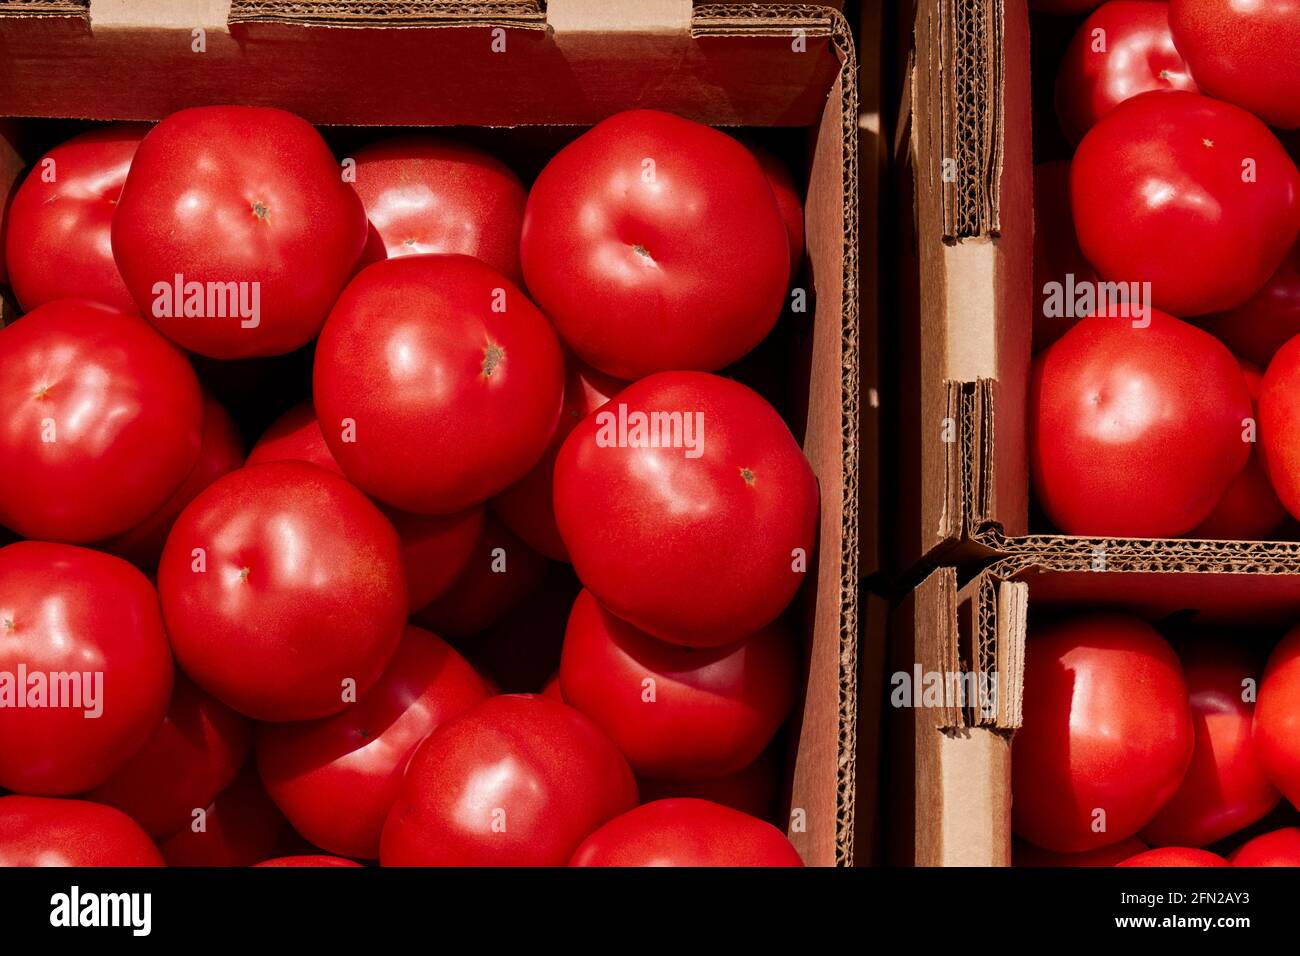 Fresh, ripe tomatoes in cardboard cases at the Leola Produce Auction in Amish Country, Leola, Lancaster County,  Pennsylvania, USA Stock Photo